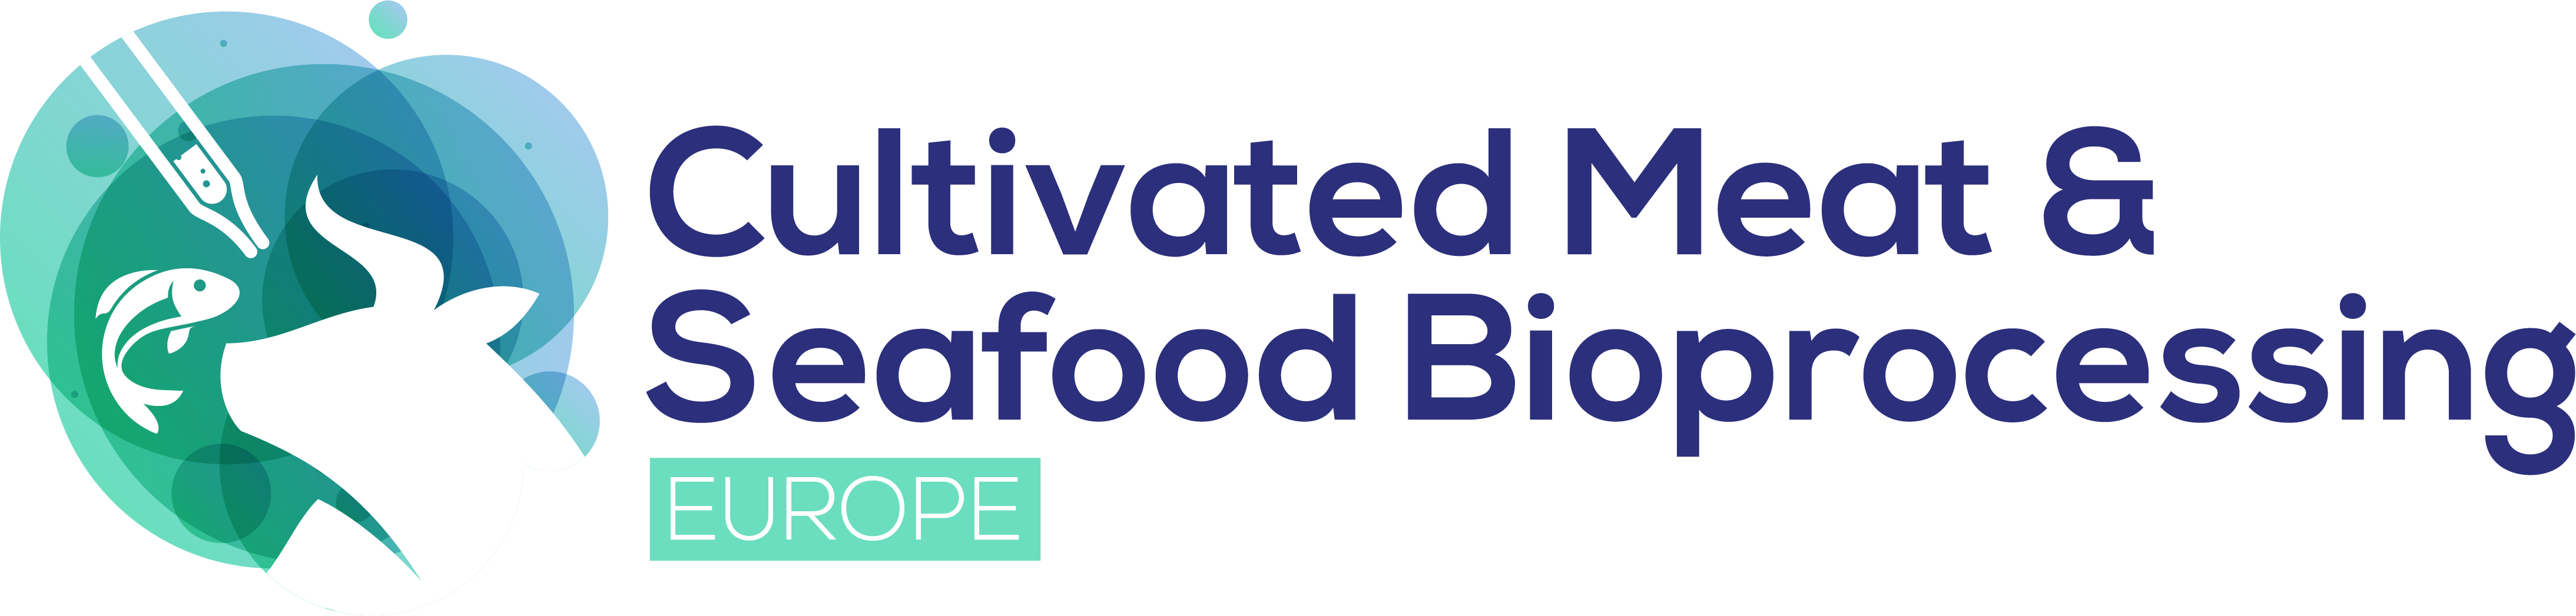 cultivated Meat & Seafood Summit Bioprocessing Europe Logo